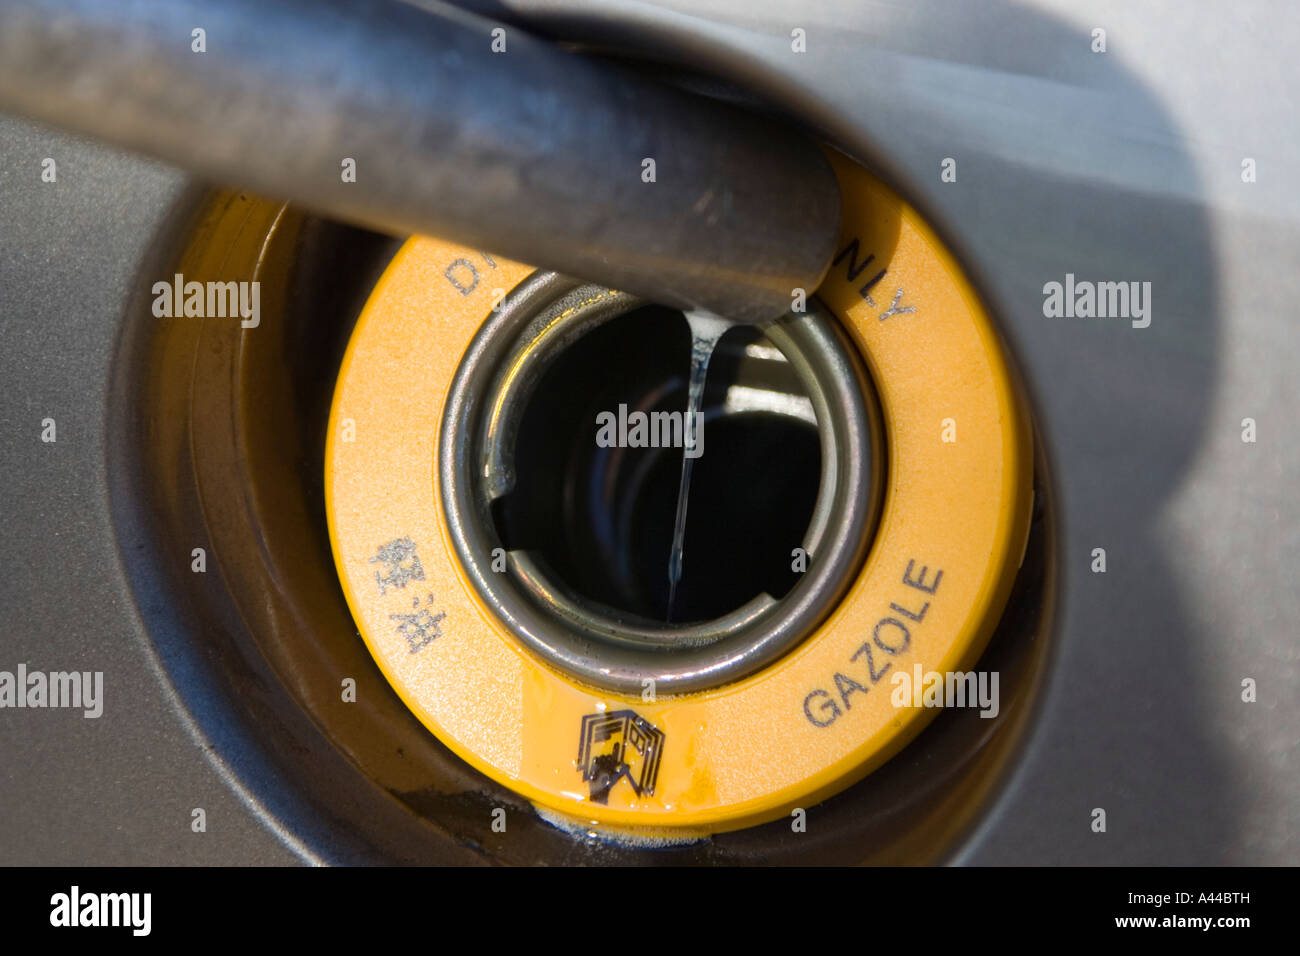 Filling tank with diesel fuel from garage pump. Close up tank, nozzle and  dribbling diesel. Land Rover Freelander car Stock Photo - Alamy